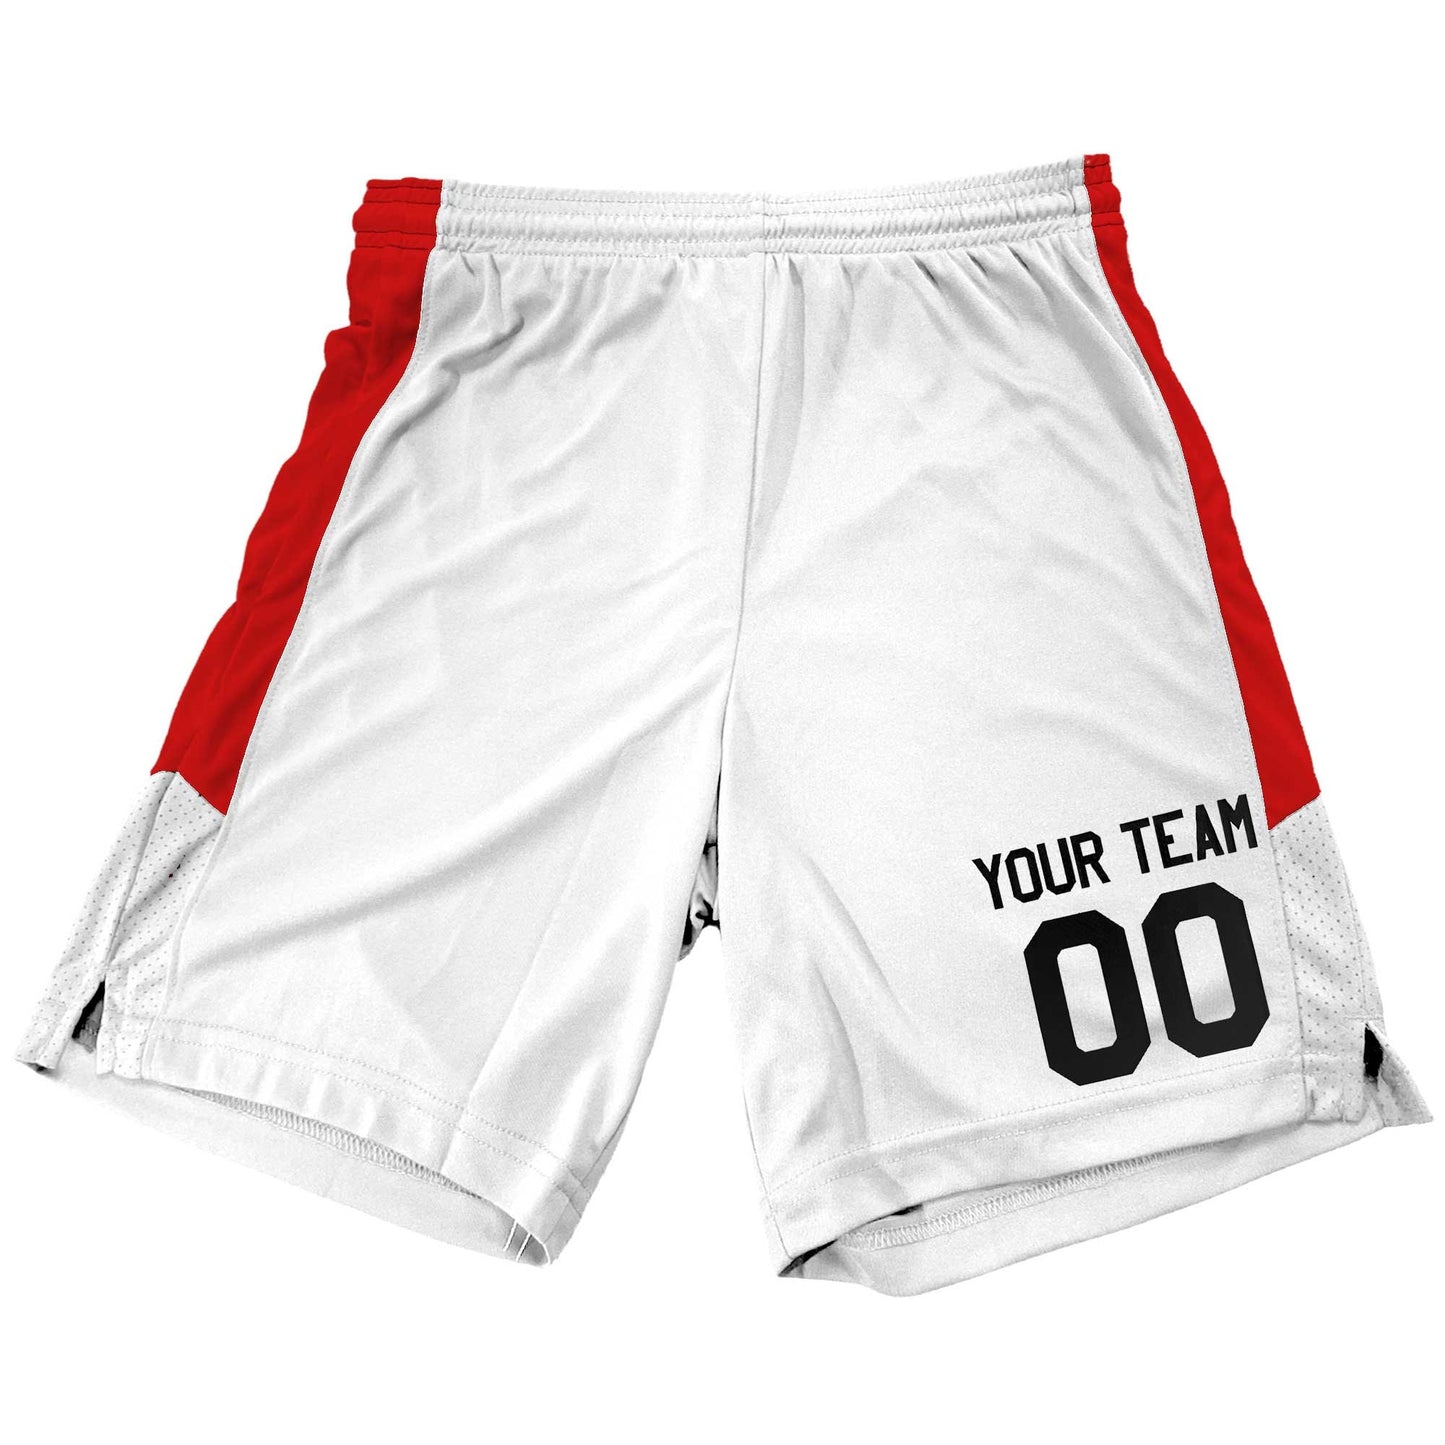 Men's Custom Basketball Shorts, 2 color Contrast Mesh Side Panel, Customized Name and Number on Left Leg, Coordinate with a Matching Jersey